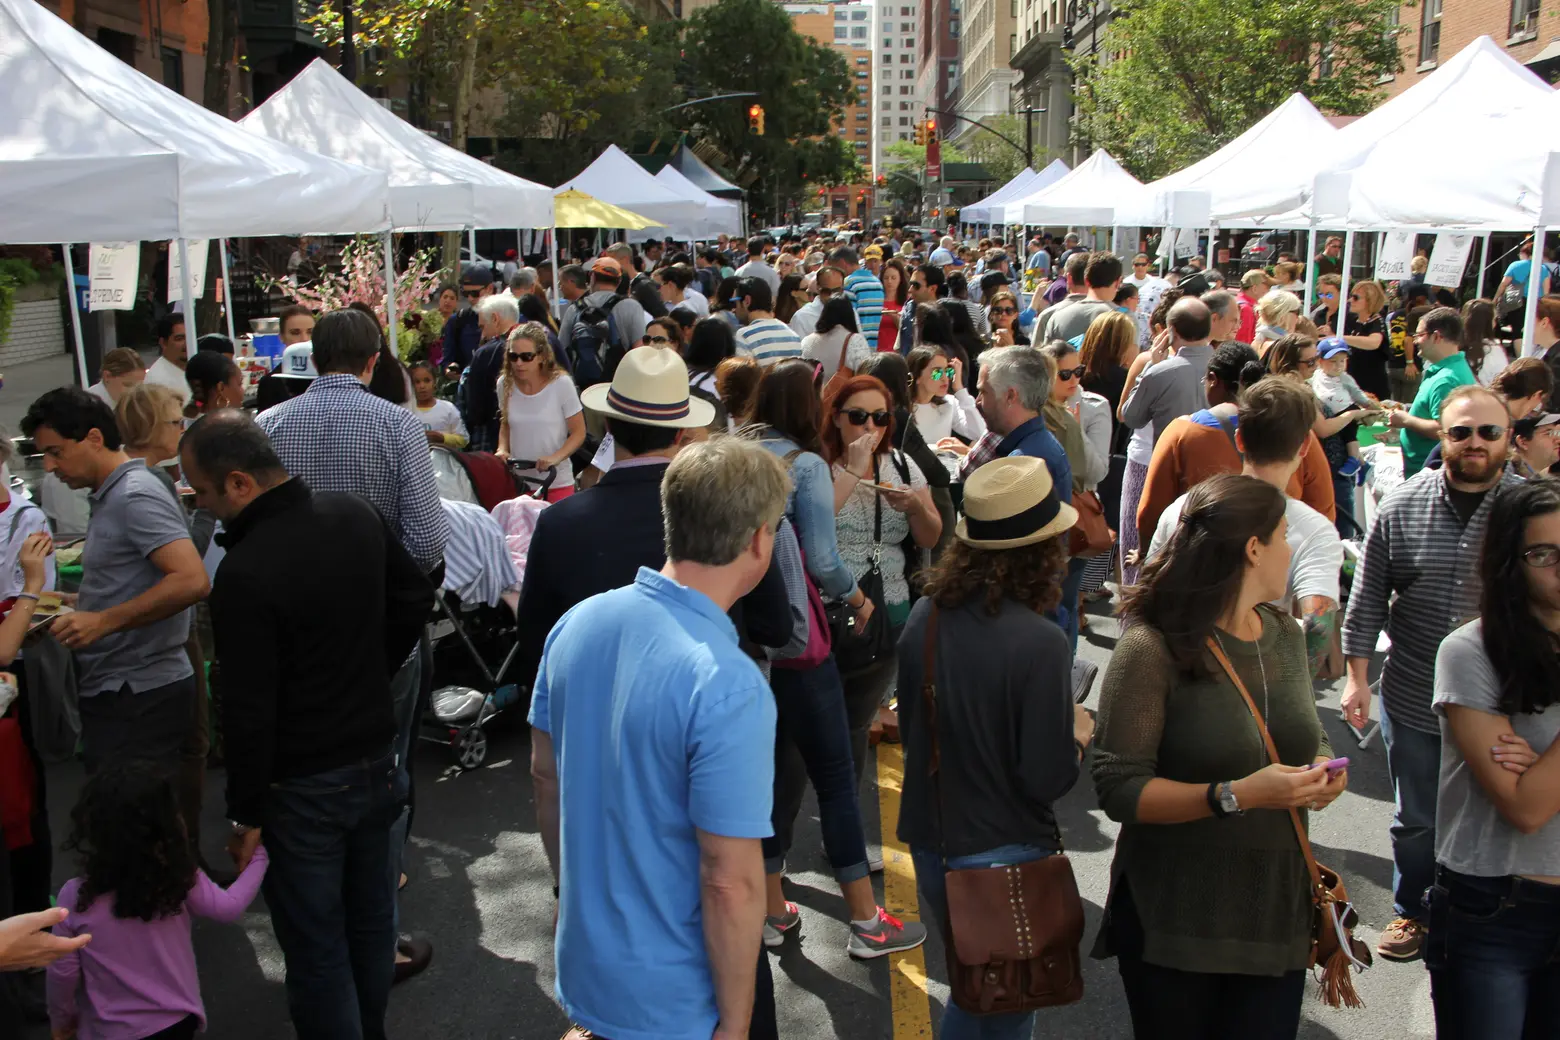 Eat your way into Fall at one of these upcoming food festivals